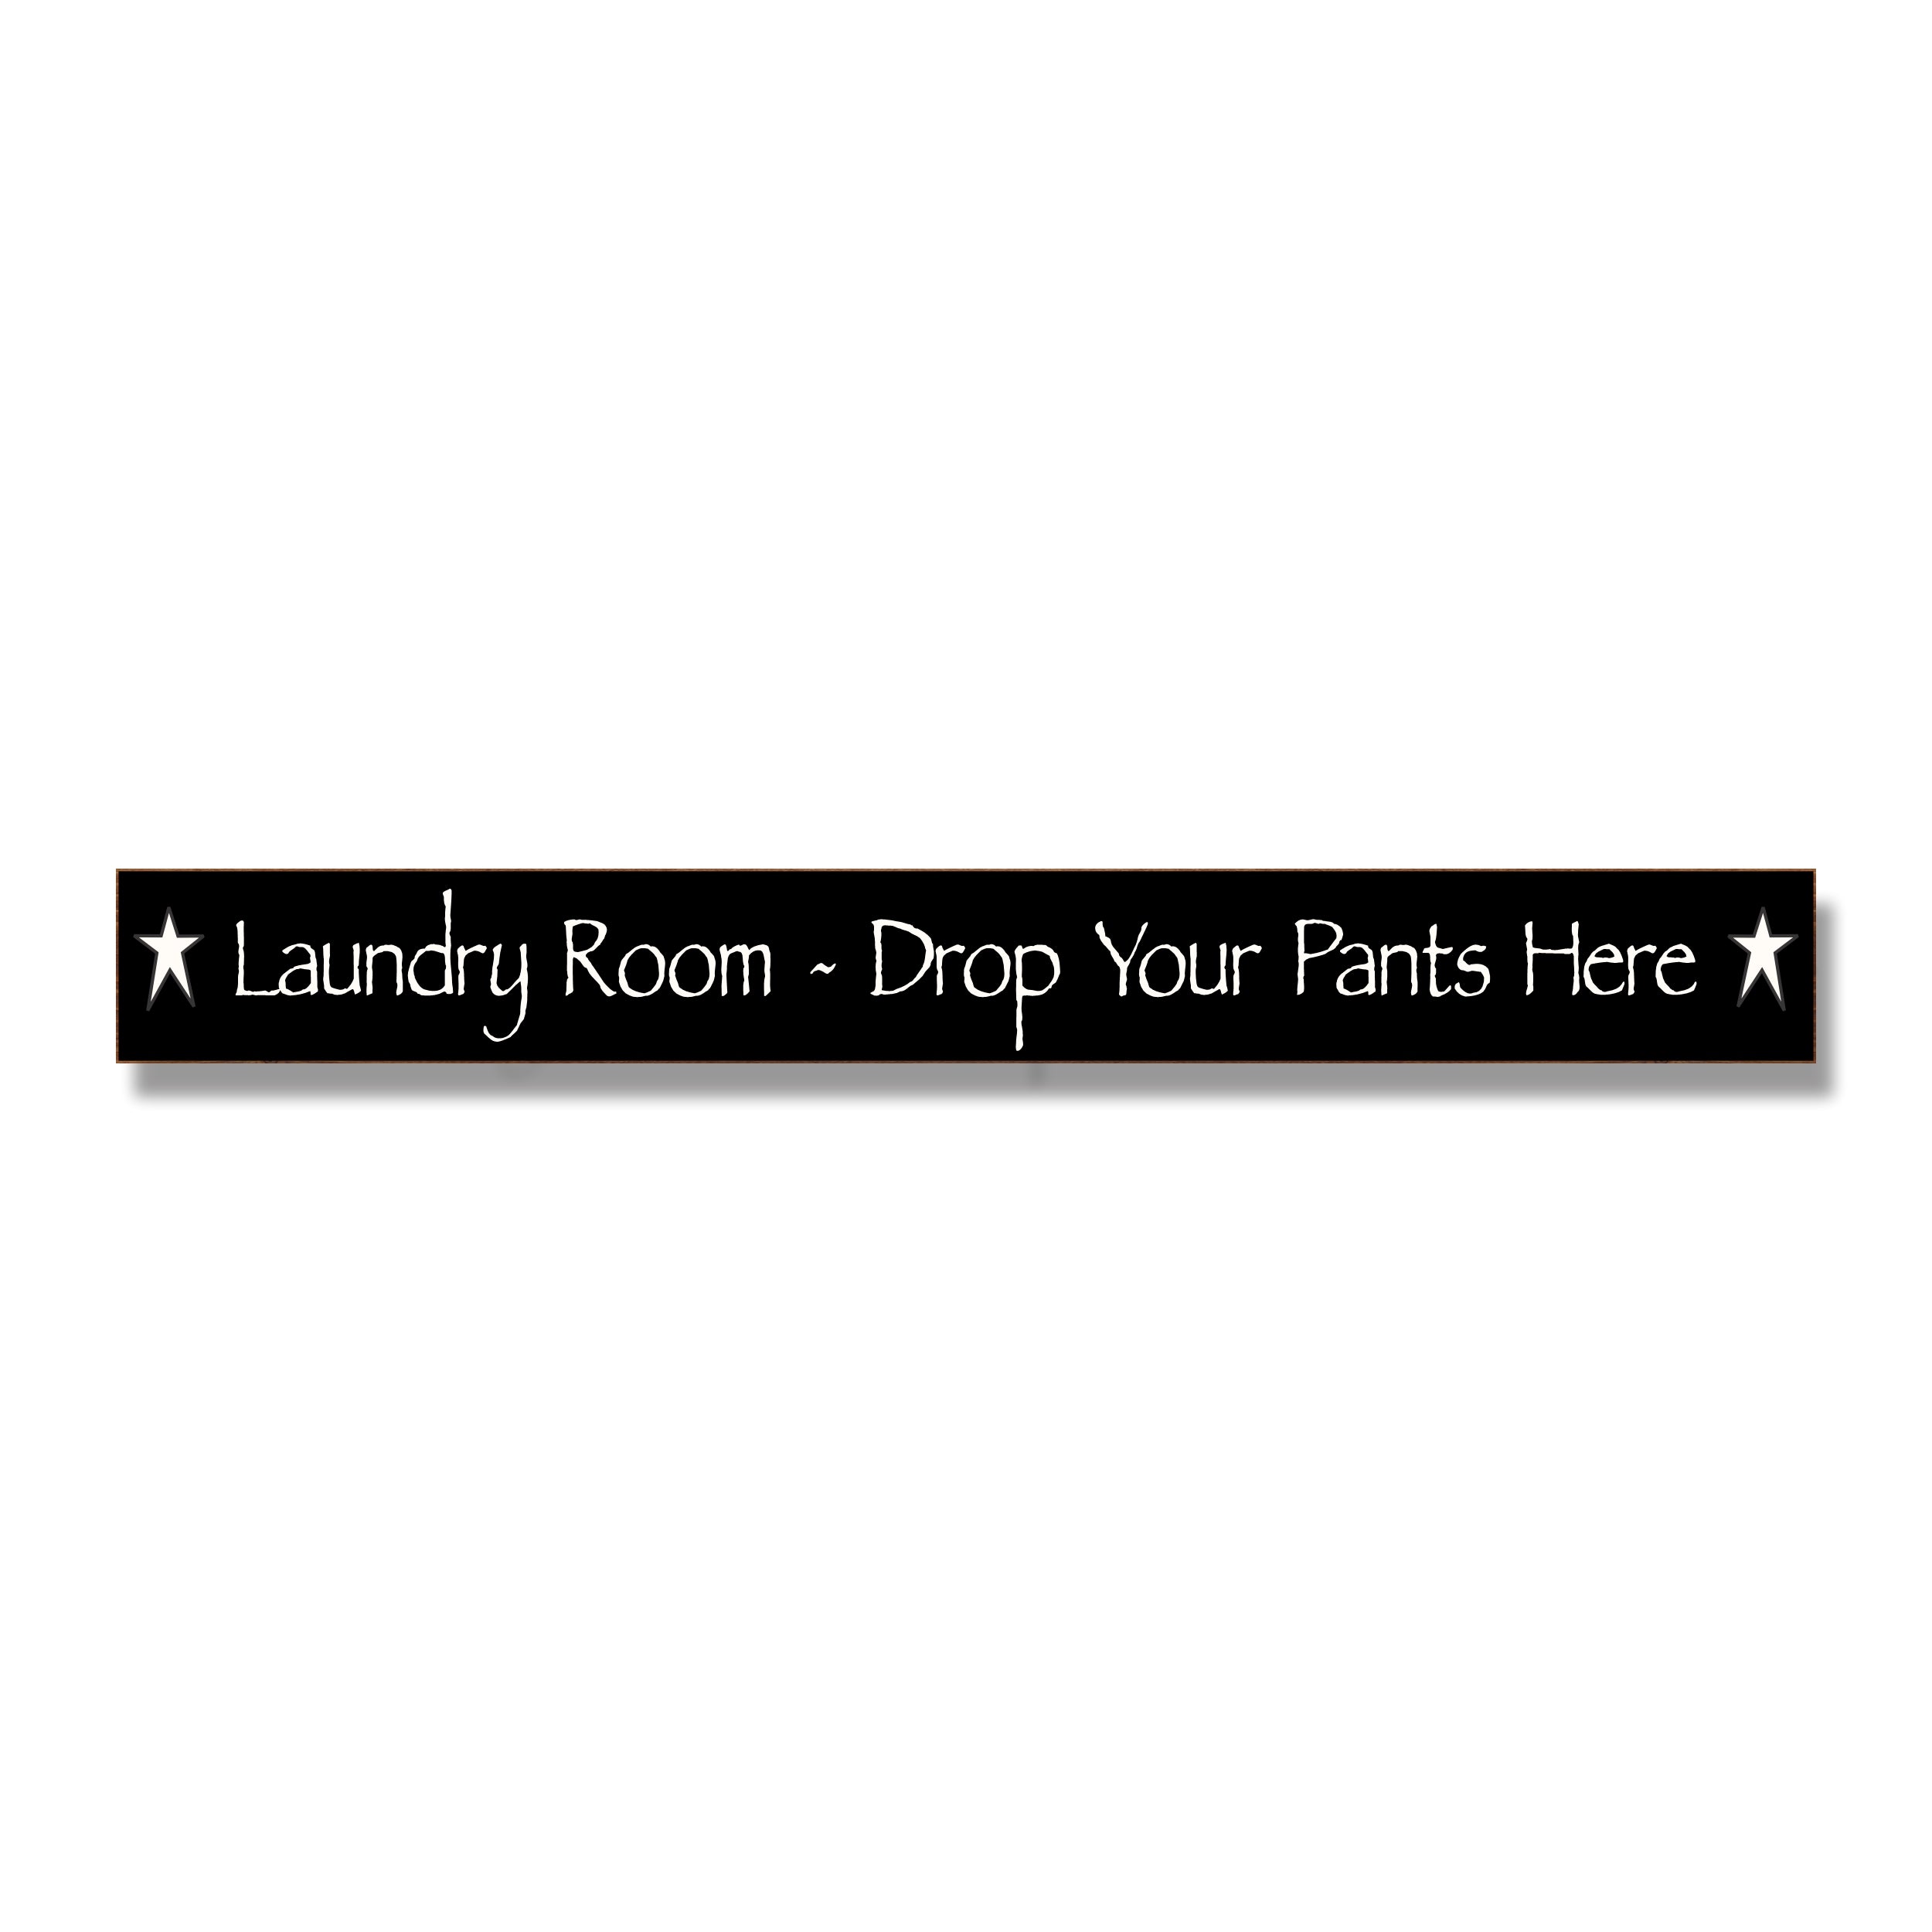 Laundry Room - Drop Your Pants Here Sign